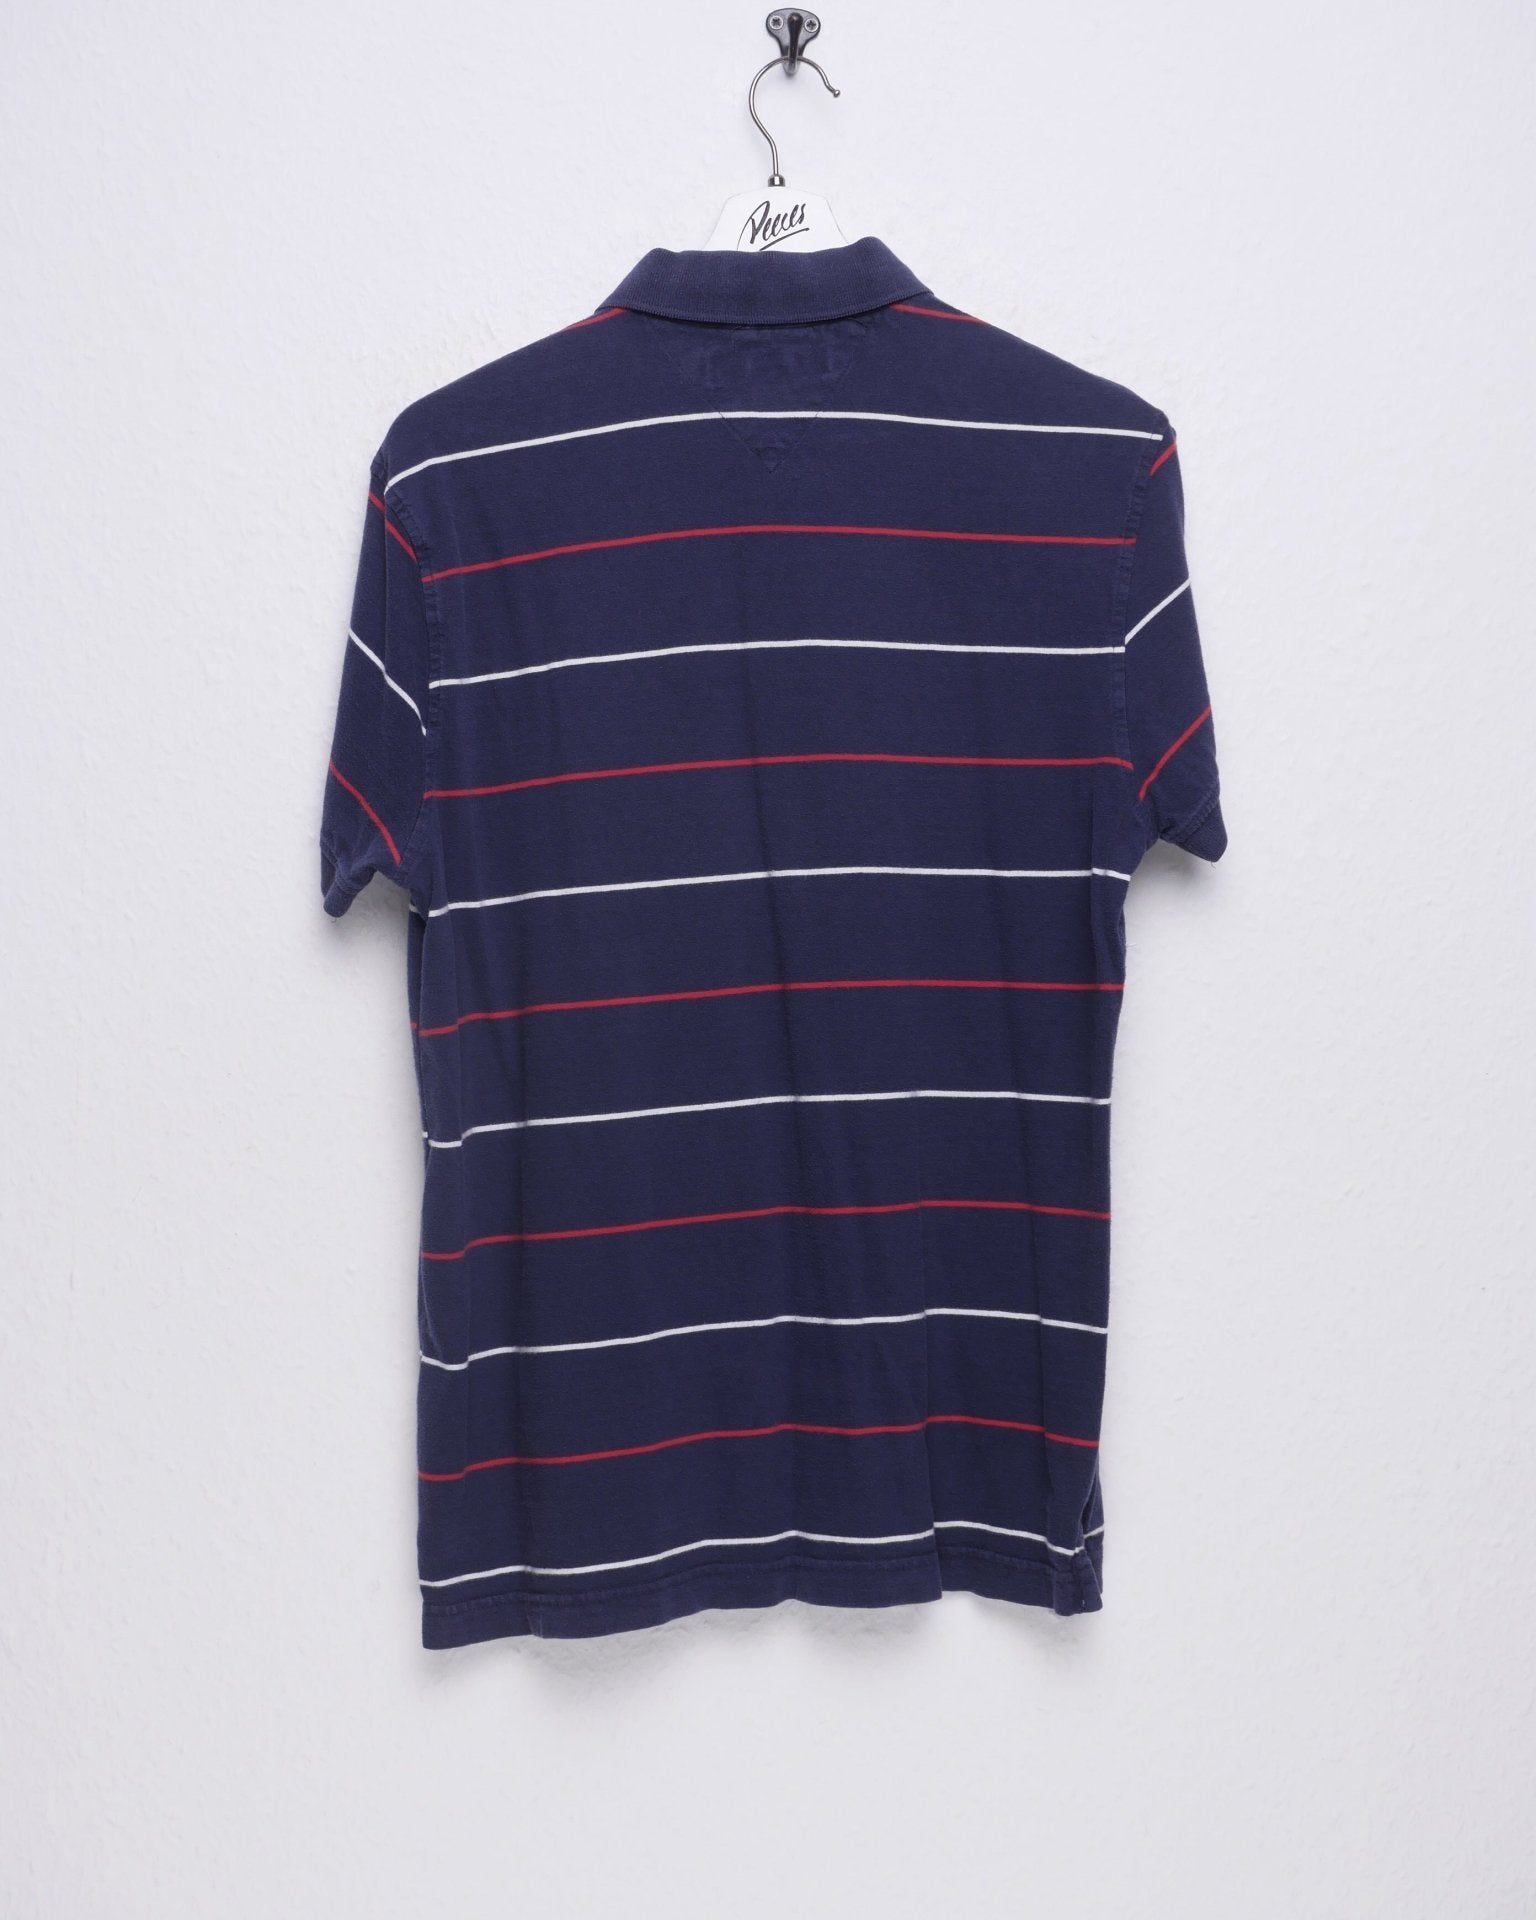 Tommy Hilfiger embroidered Logo Vintage Polo Shirt - Peeces